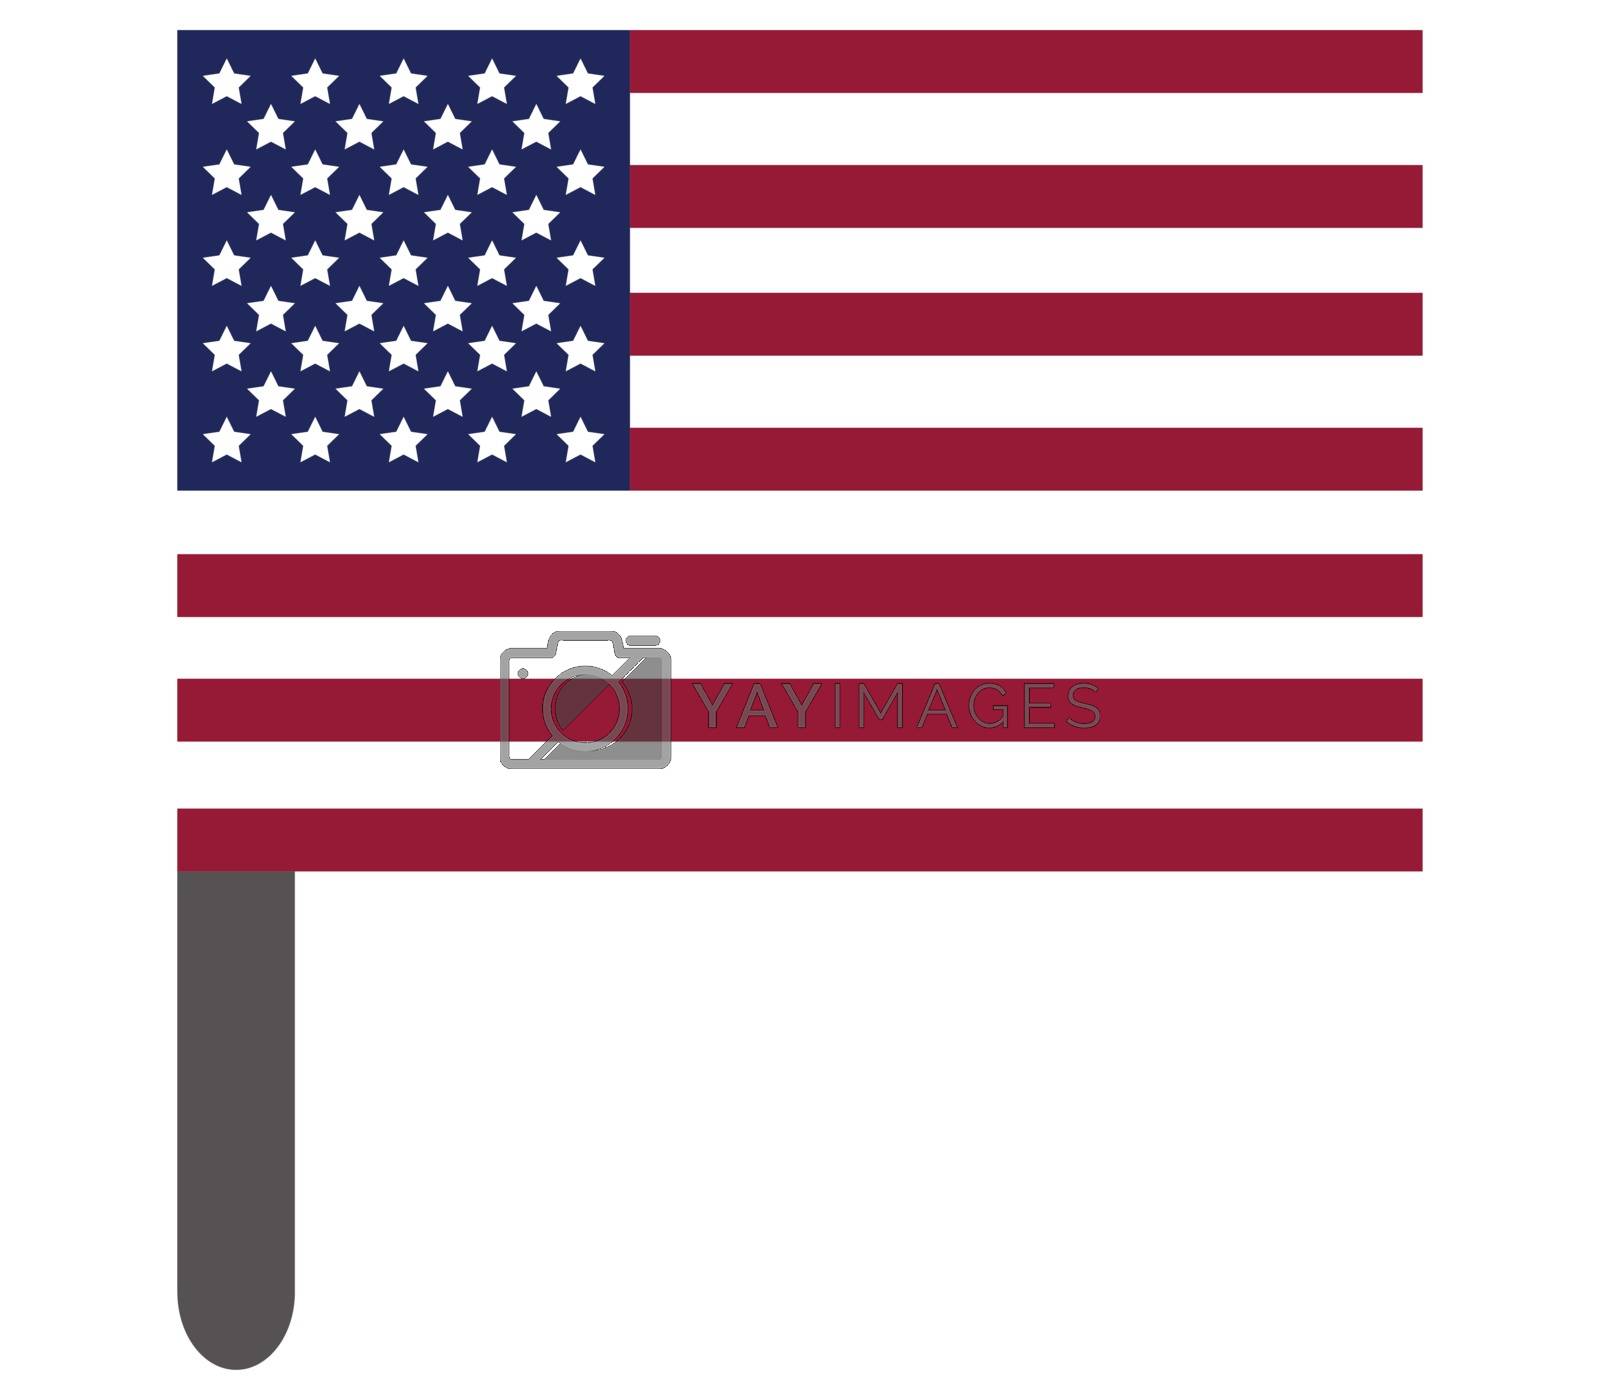 Royalty free image of United States flag by Mark1987